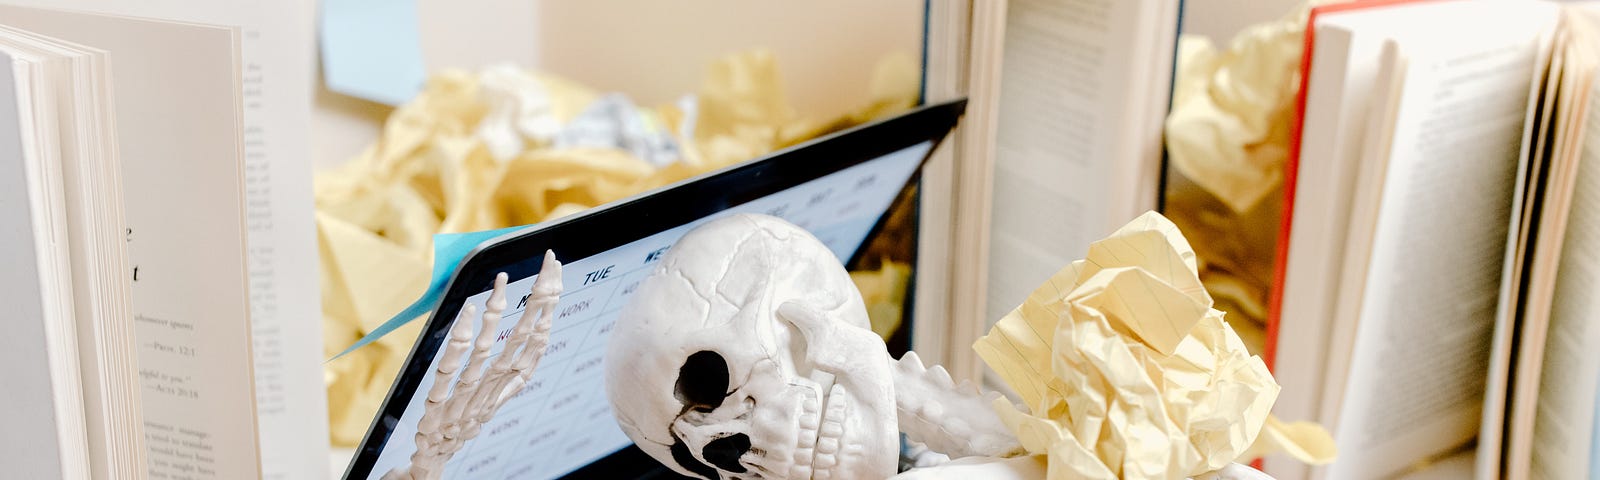 A skeleton lying on the laptop